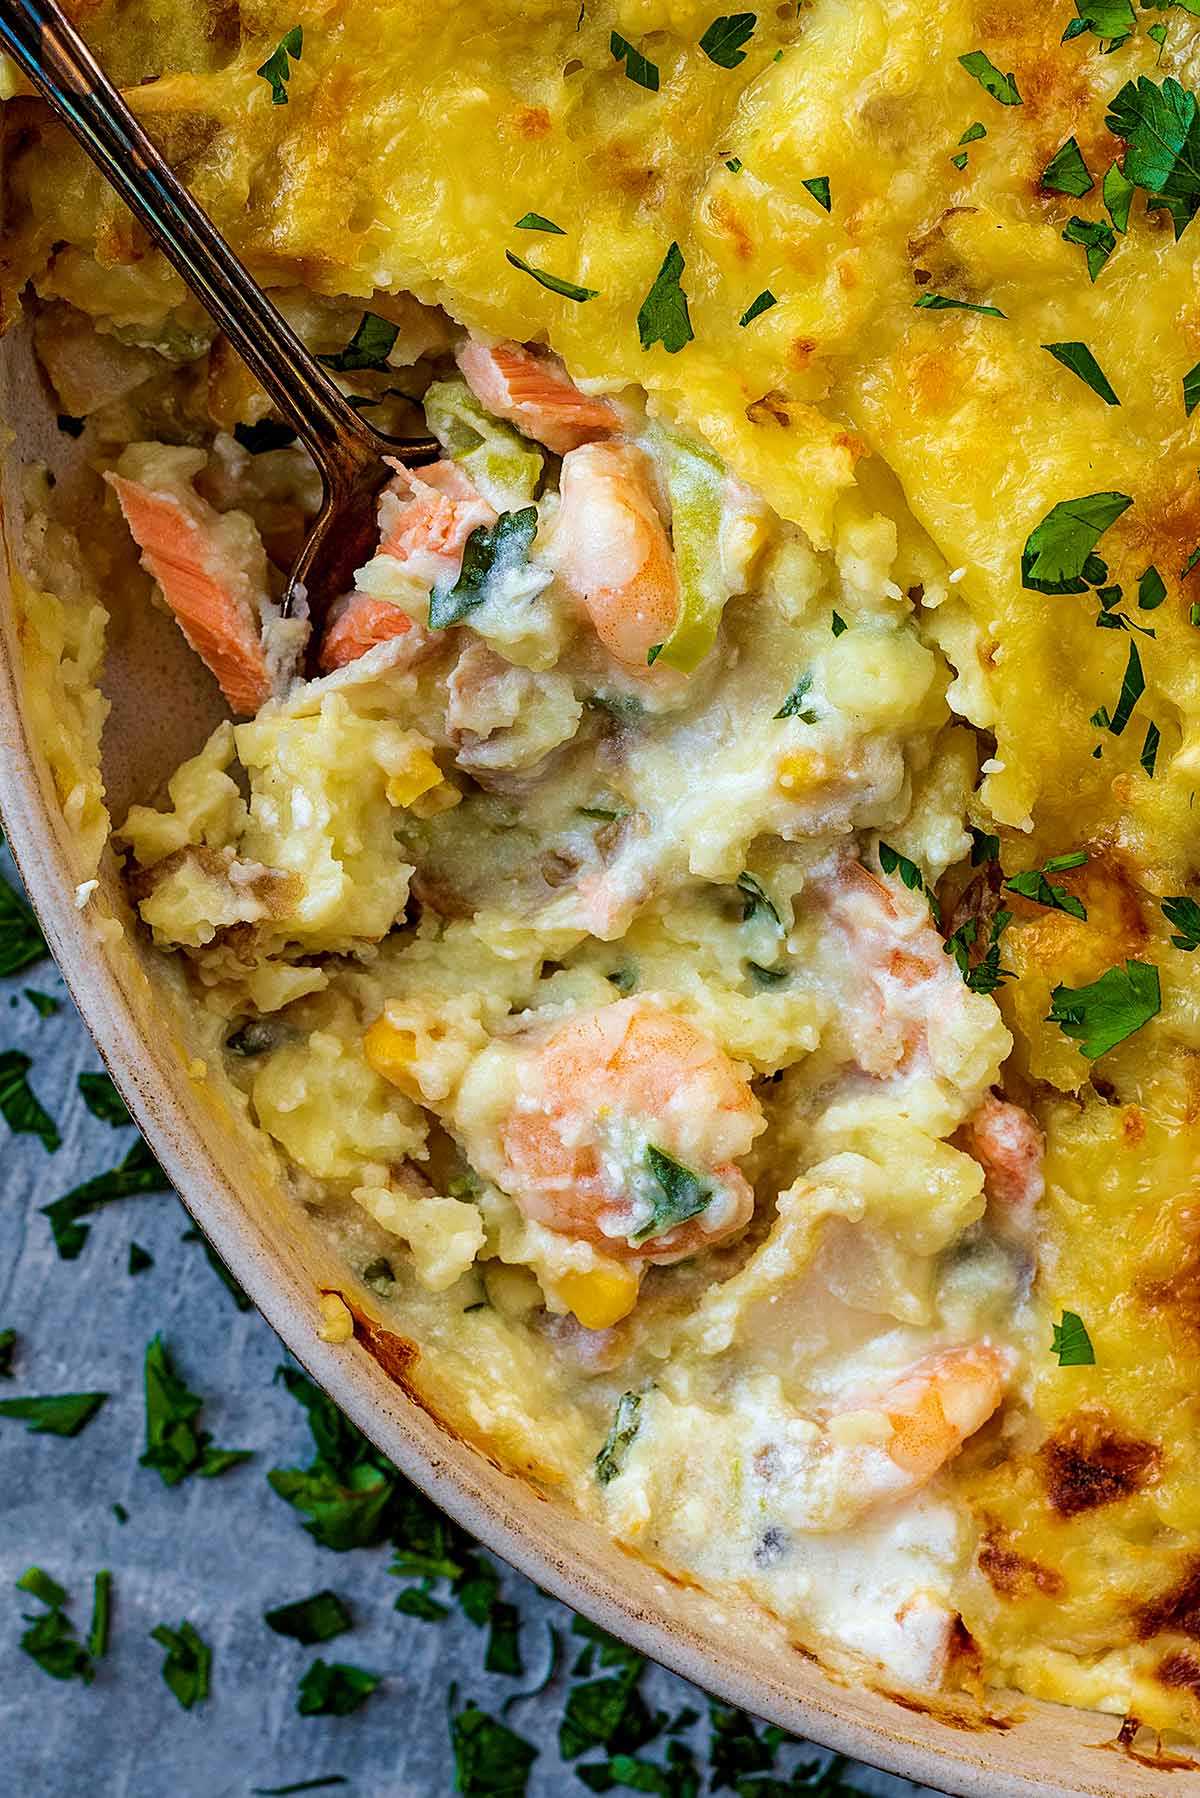 Prawns and flaked fish in a creamy sauce under a mashed potato top.